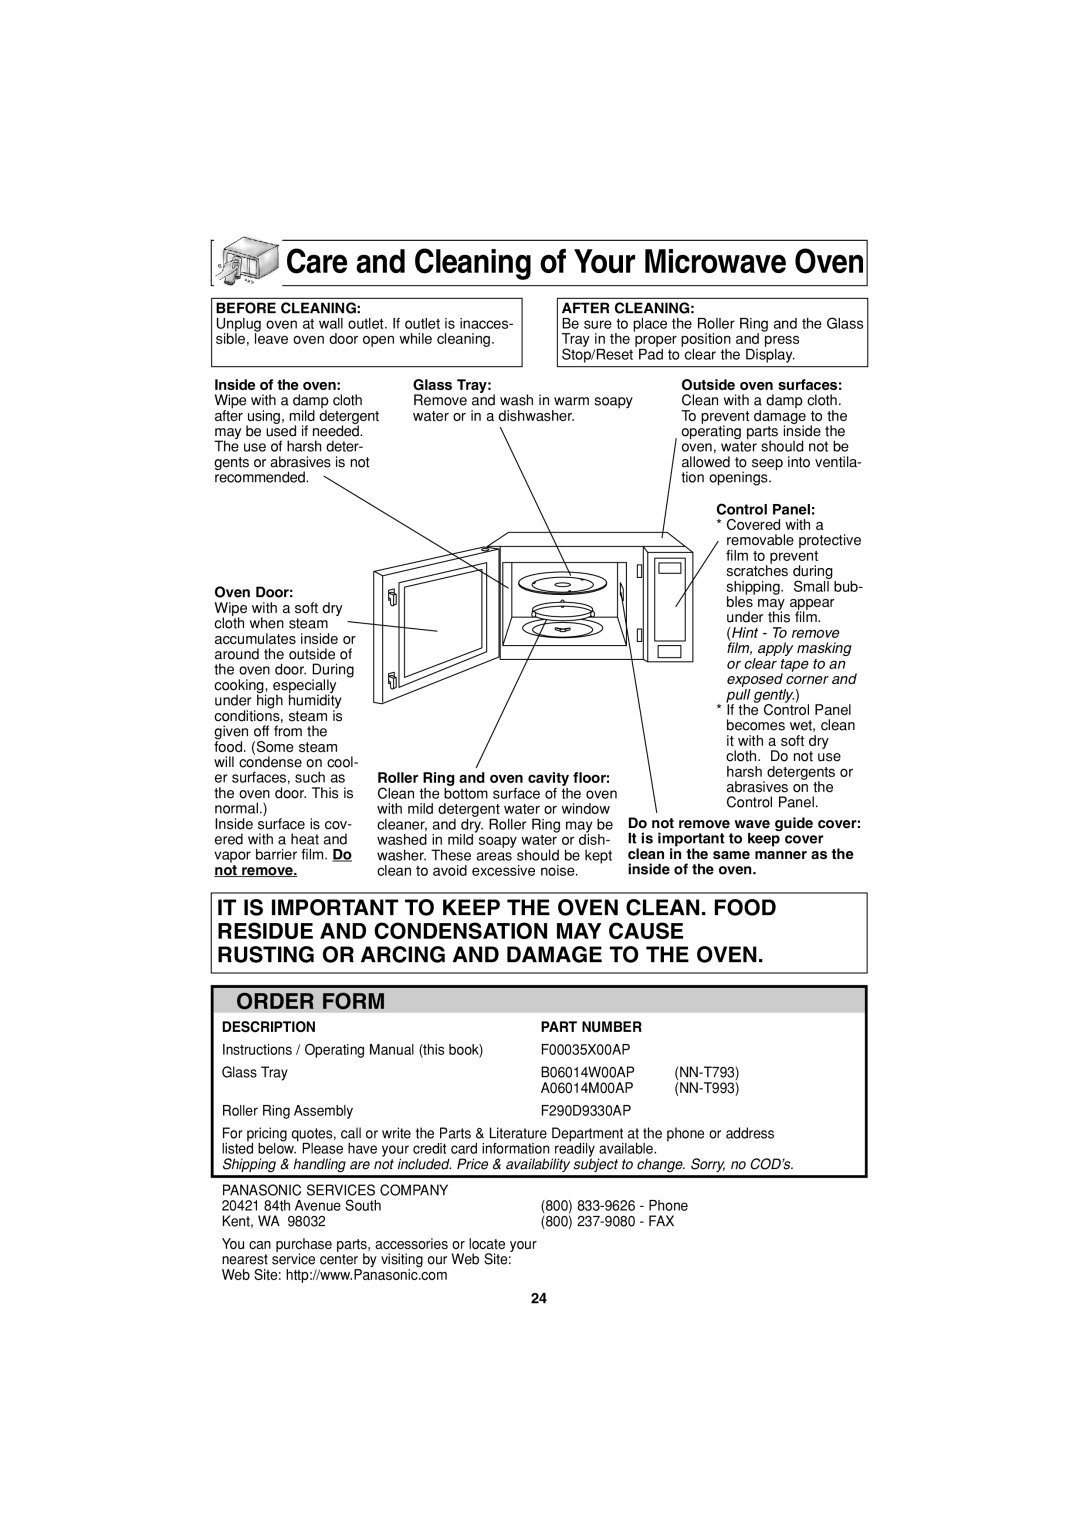 Panasonic NN-T793, NN-T993 operating instructions Care and Cleaning of Your Microwave Oven, Order Form 